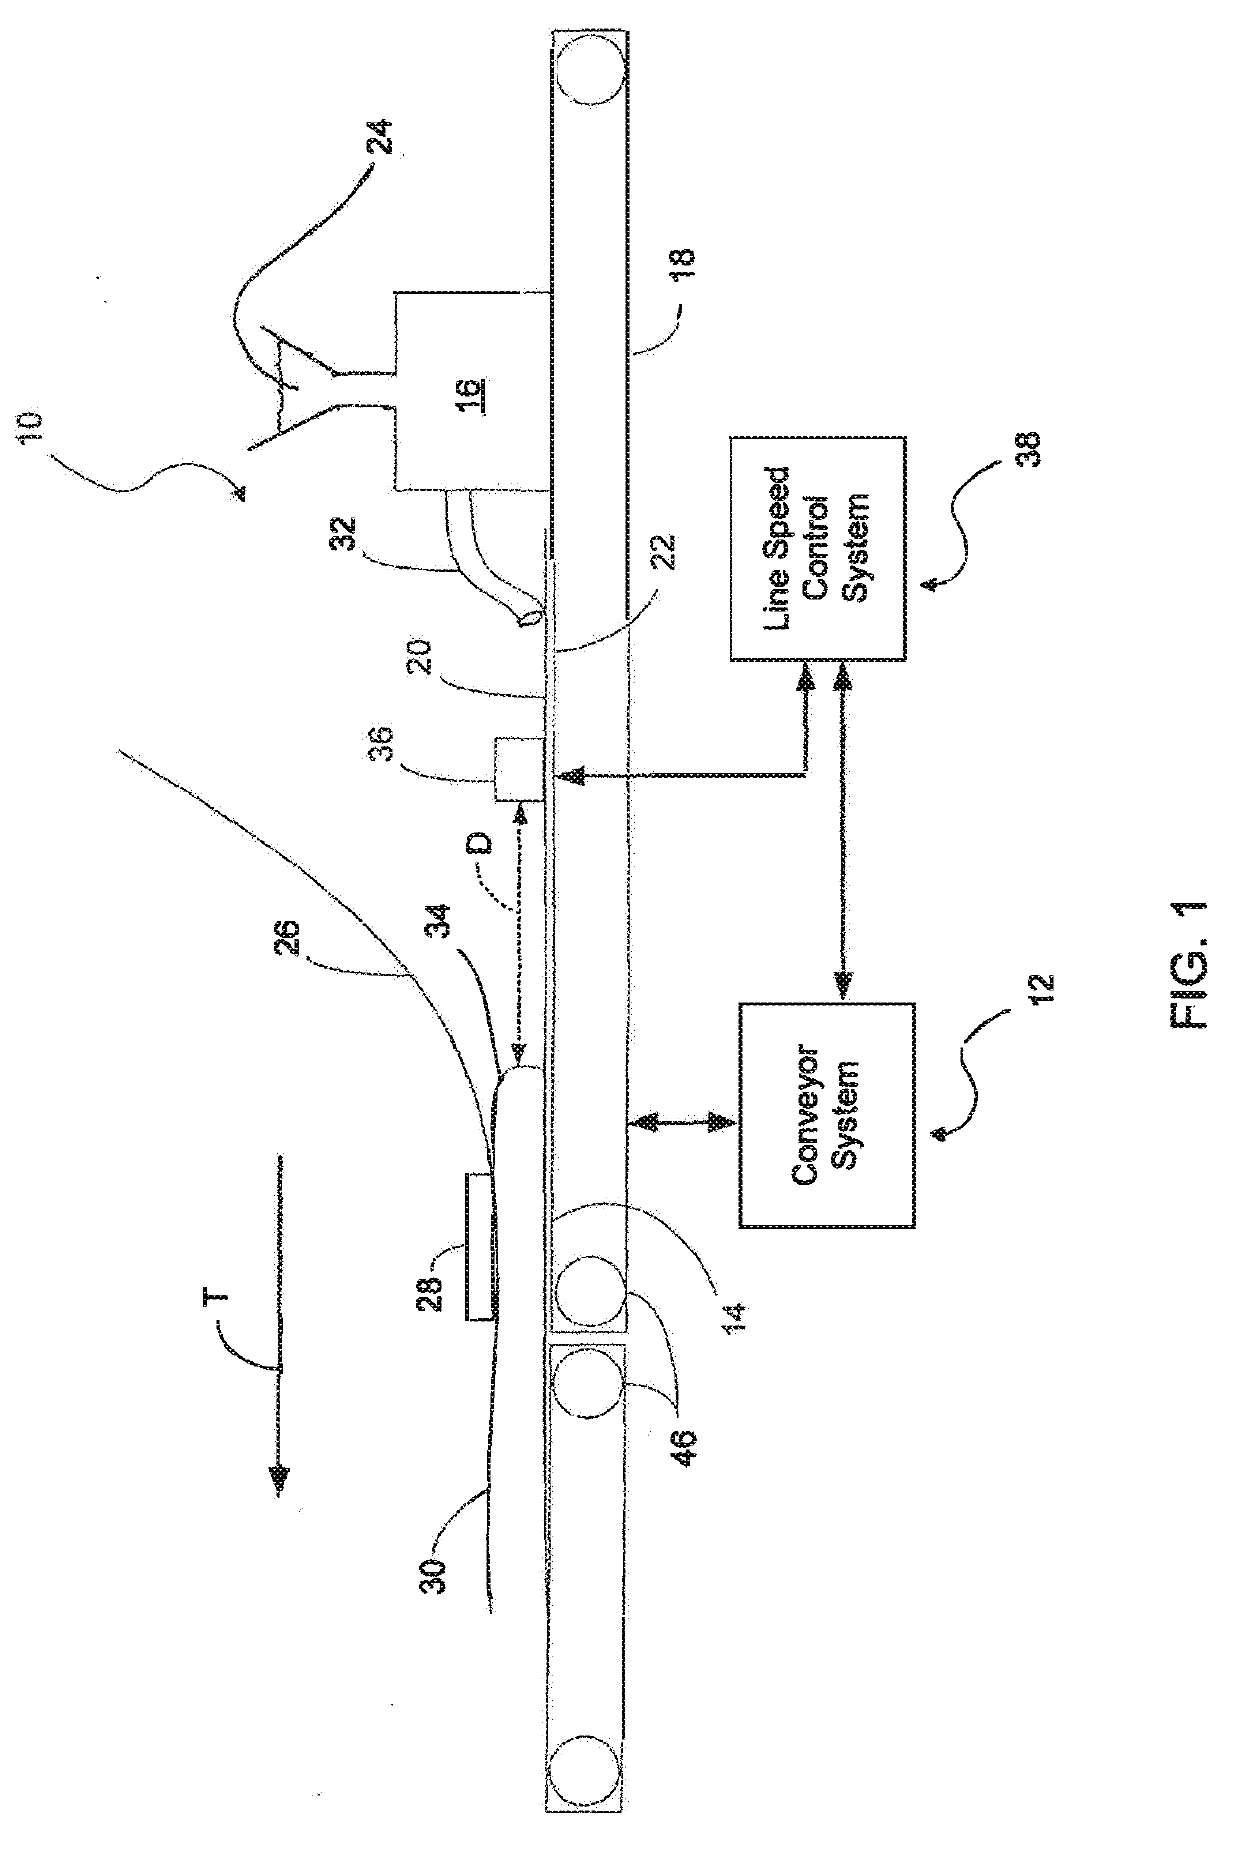 Systems and methods for controlling a conveyor system during product changeovers